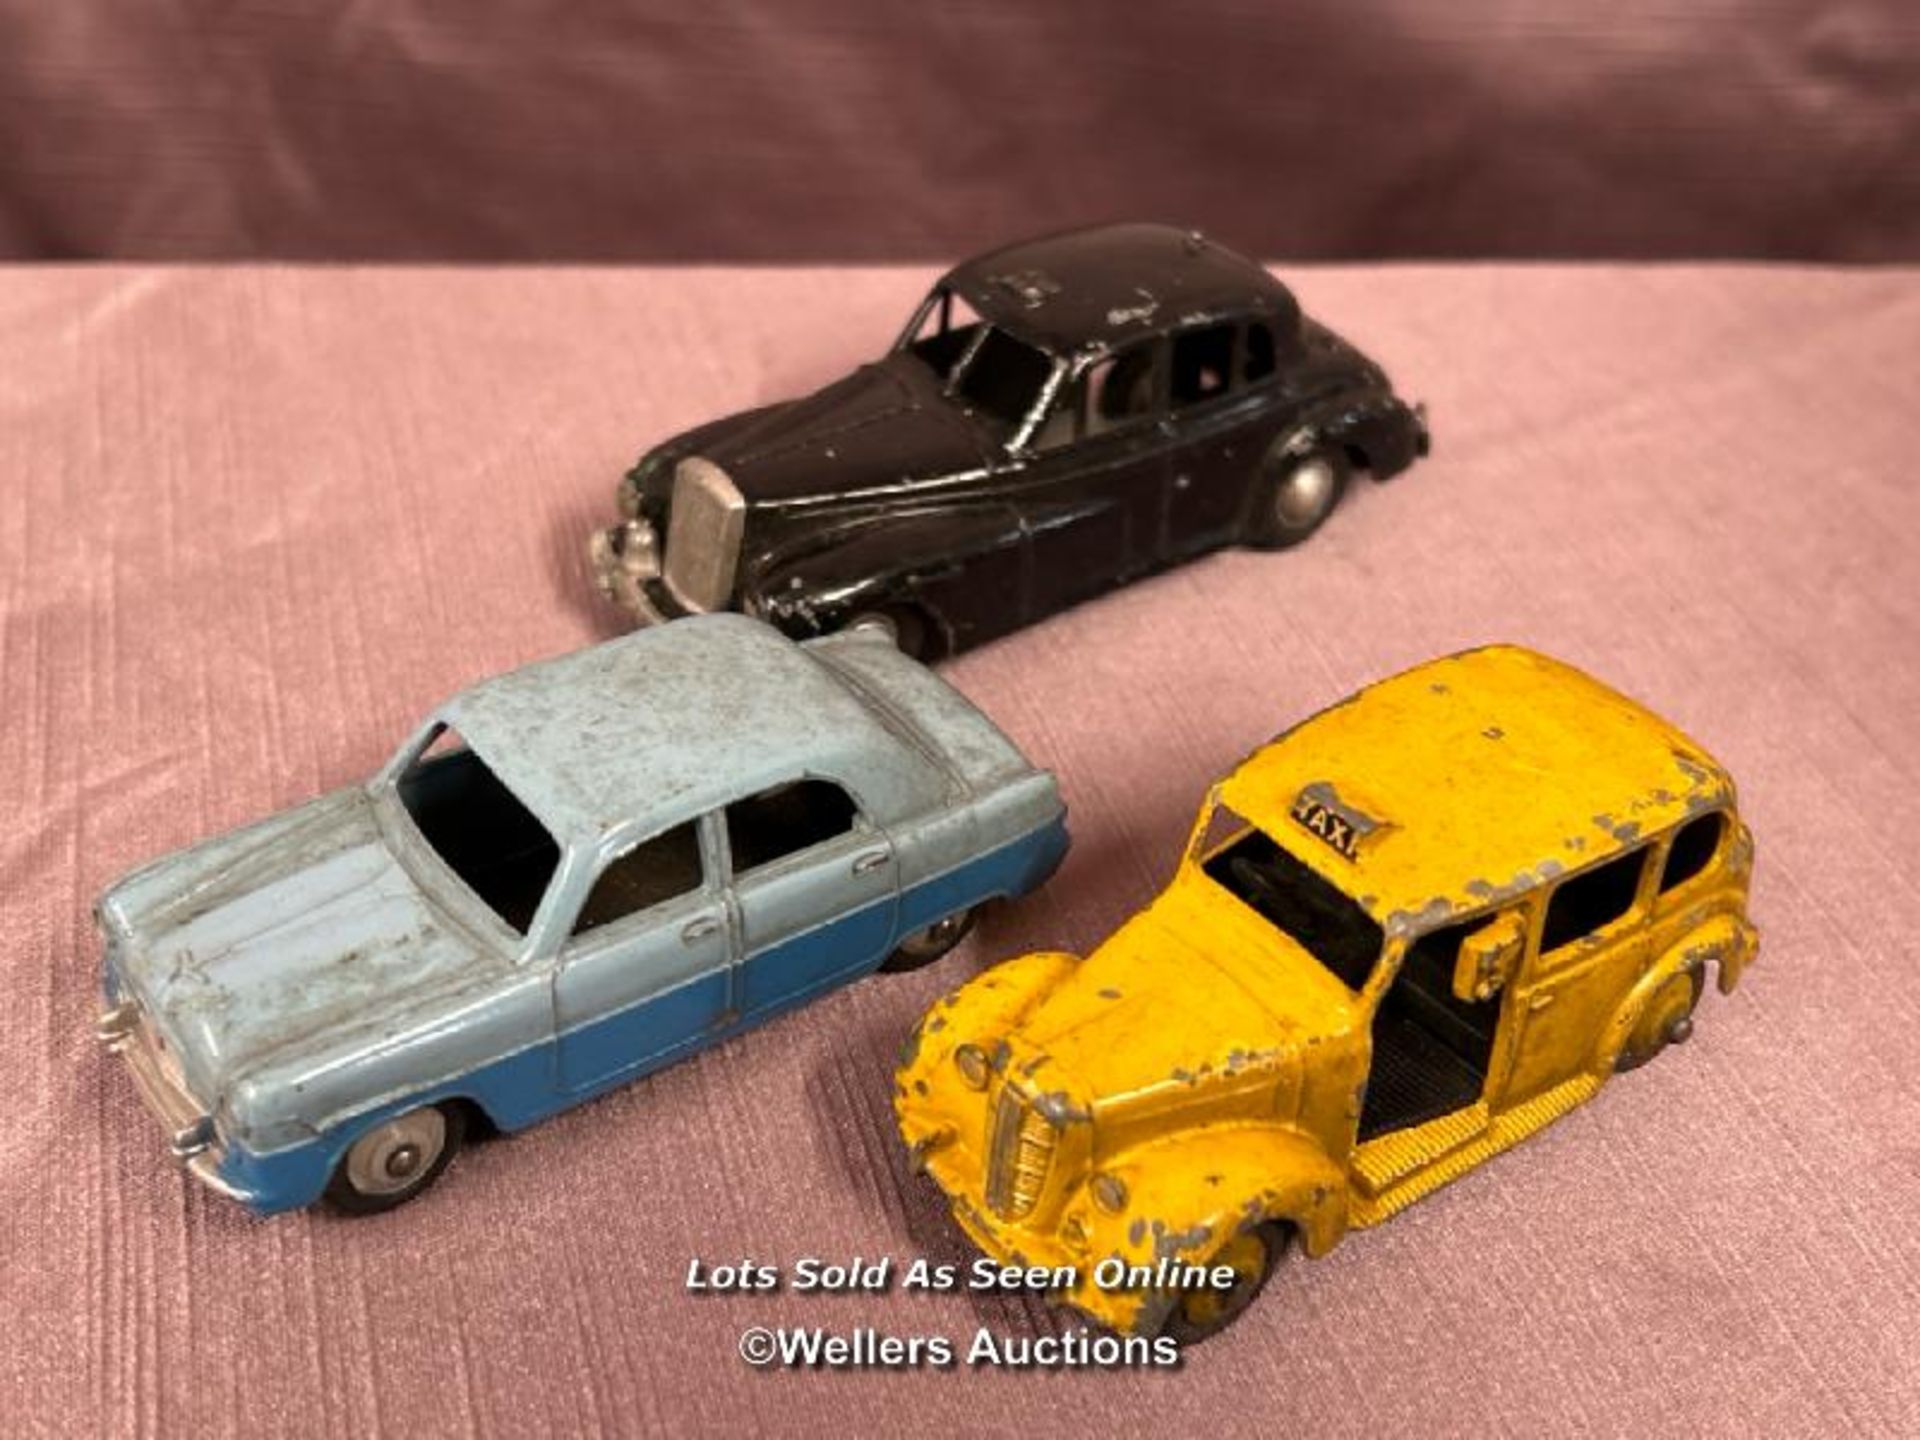 THREE DIE CAST CARS INCLUDING DINKY FORD ZEPHYR NO. 162, DINKY AUSTIN TAXI AND WOLSELEY 60-80